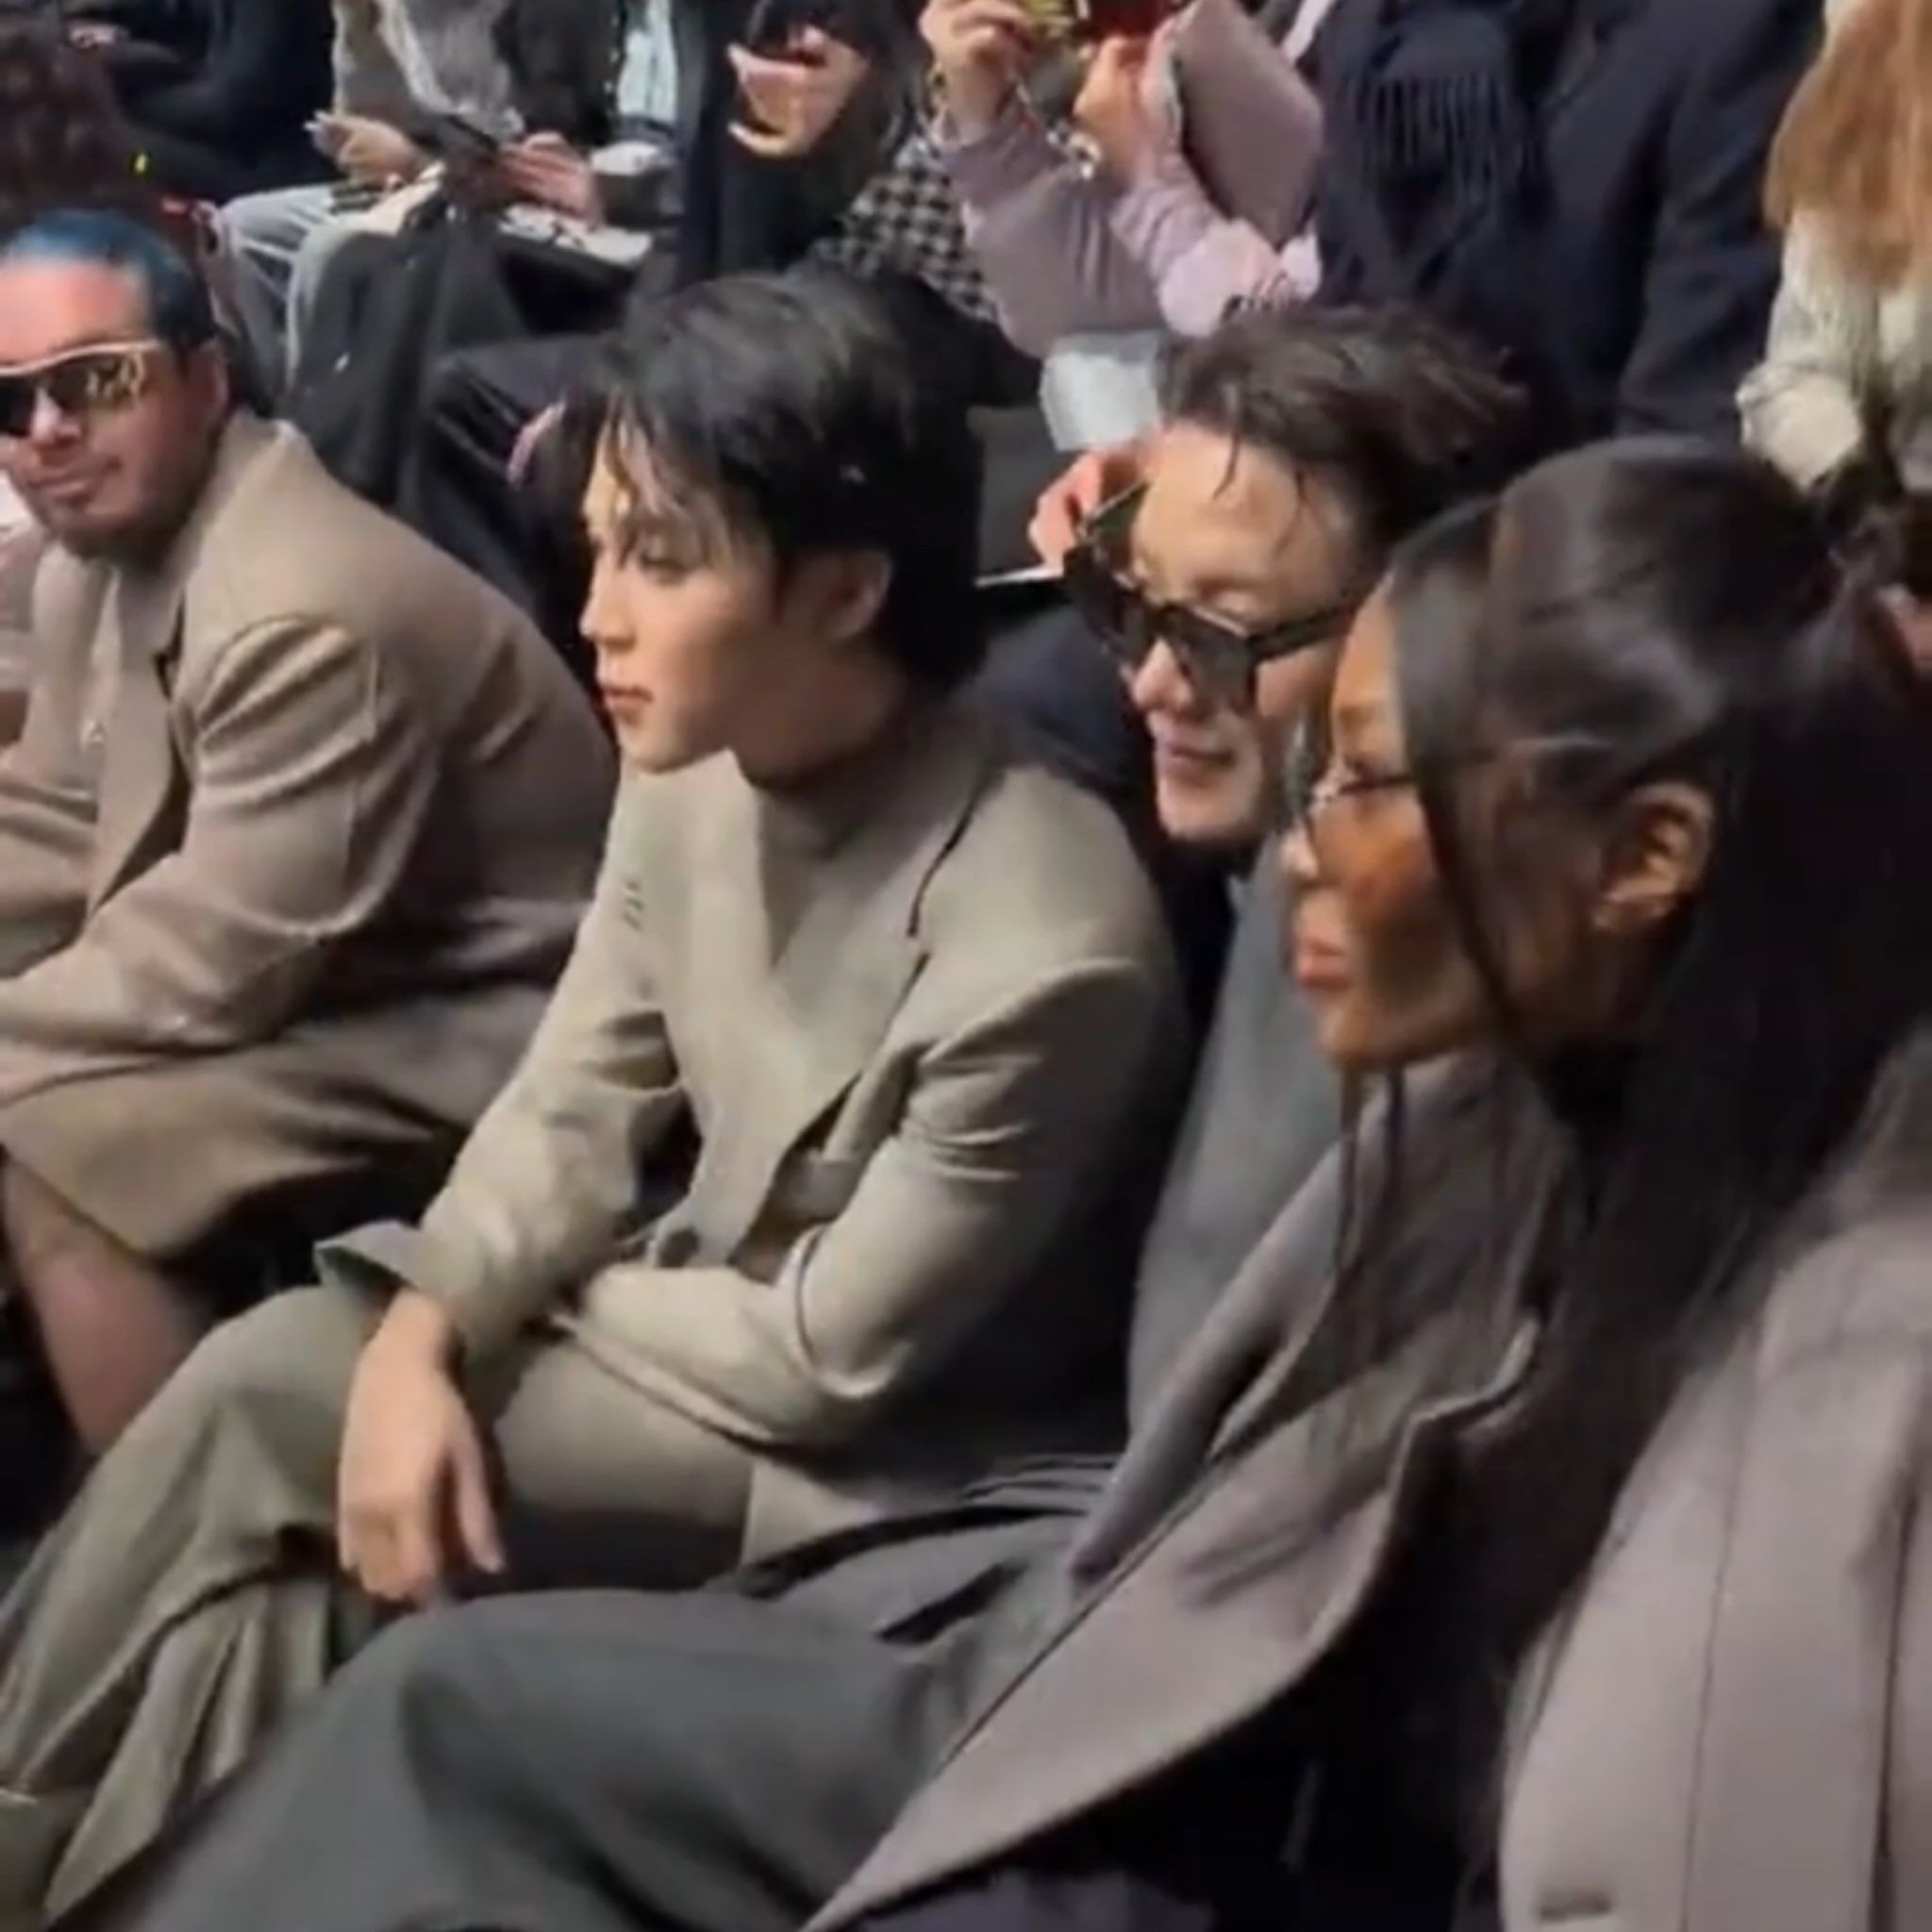 Model Naomi Campbell spotted with BTS’ Park Jimin, Jung Ho-seok at Dior show in Paris Fashion week 2023: Watch